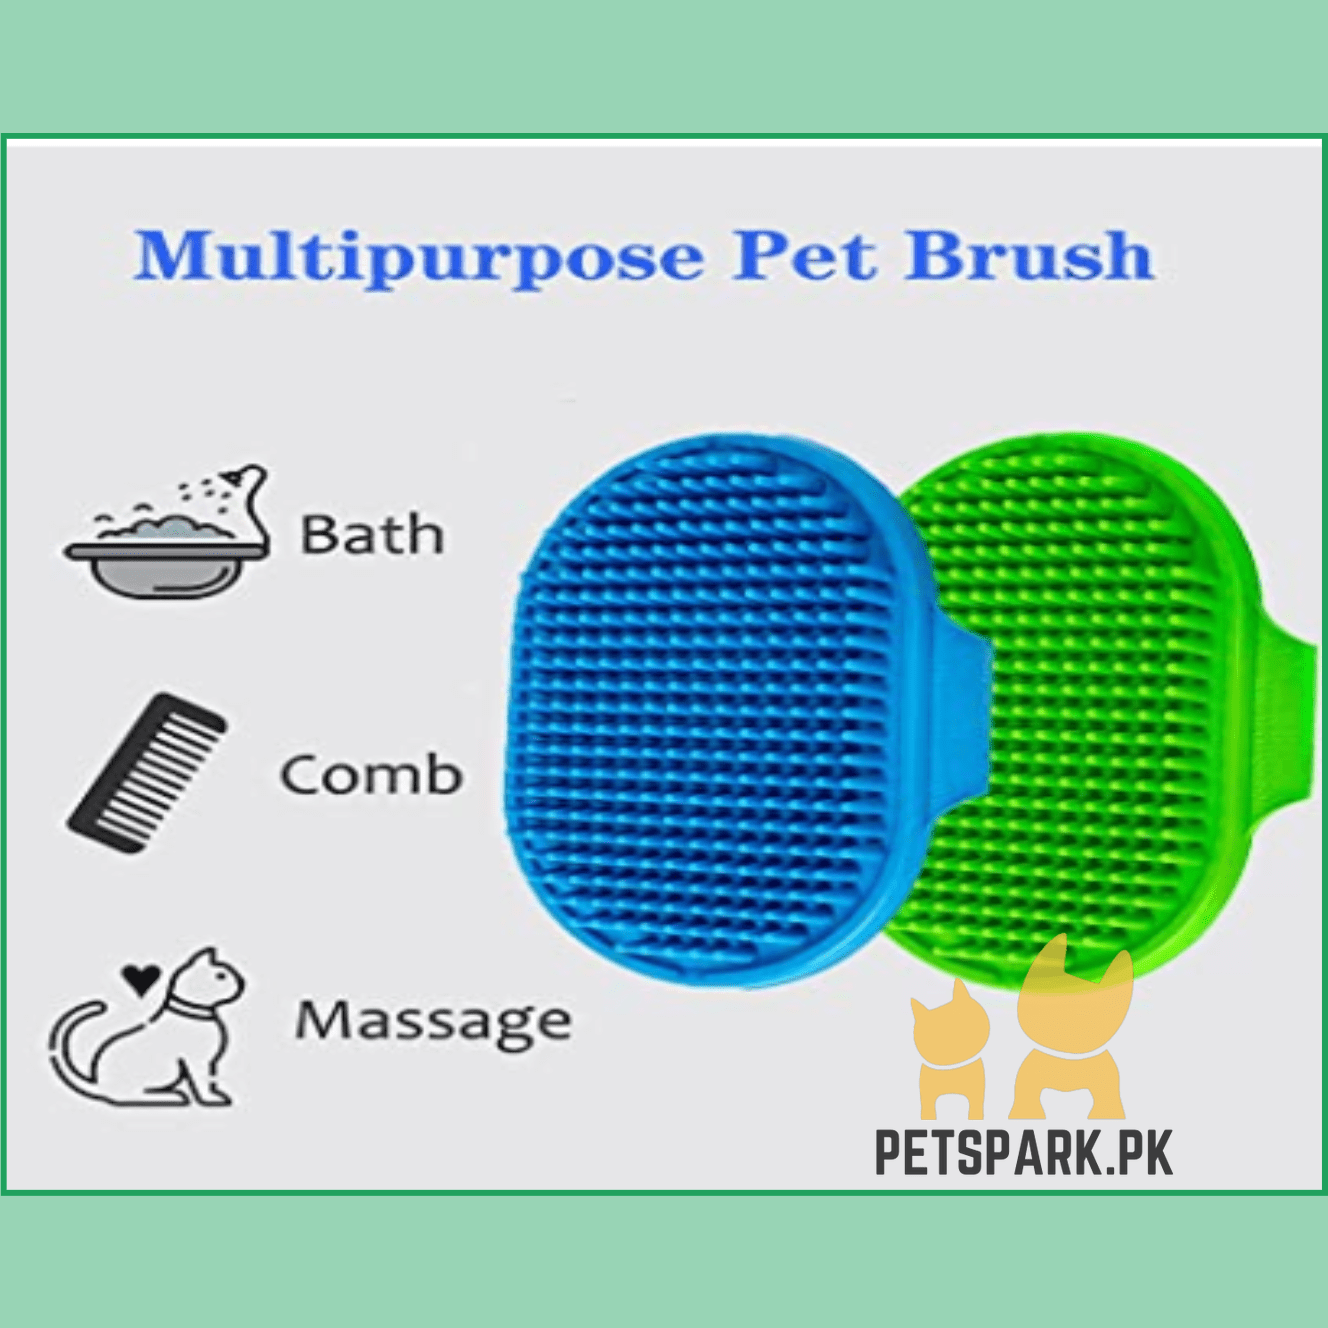 Hand Grooming Silicon Brush for Cats and Dogs pets-park-pk